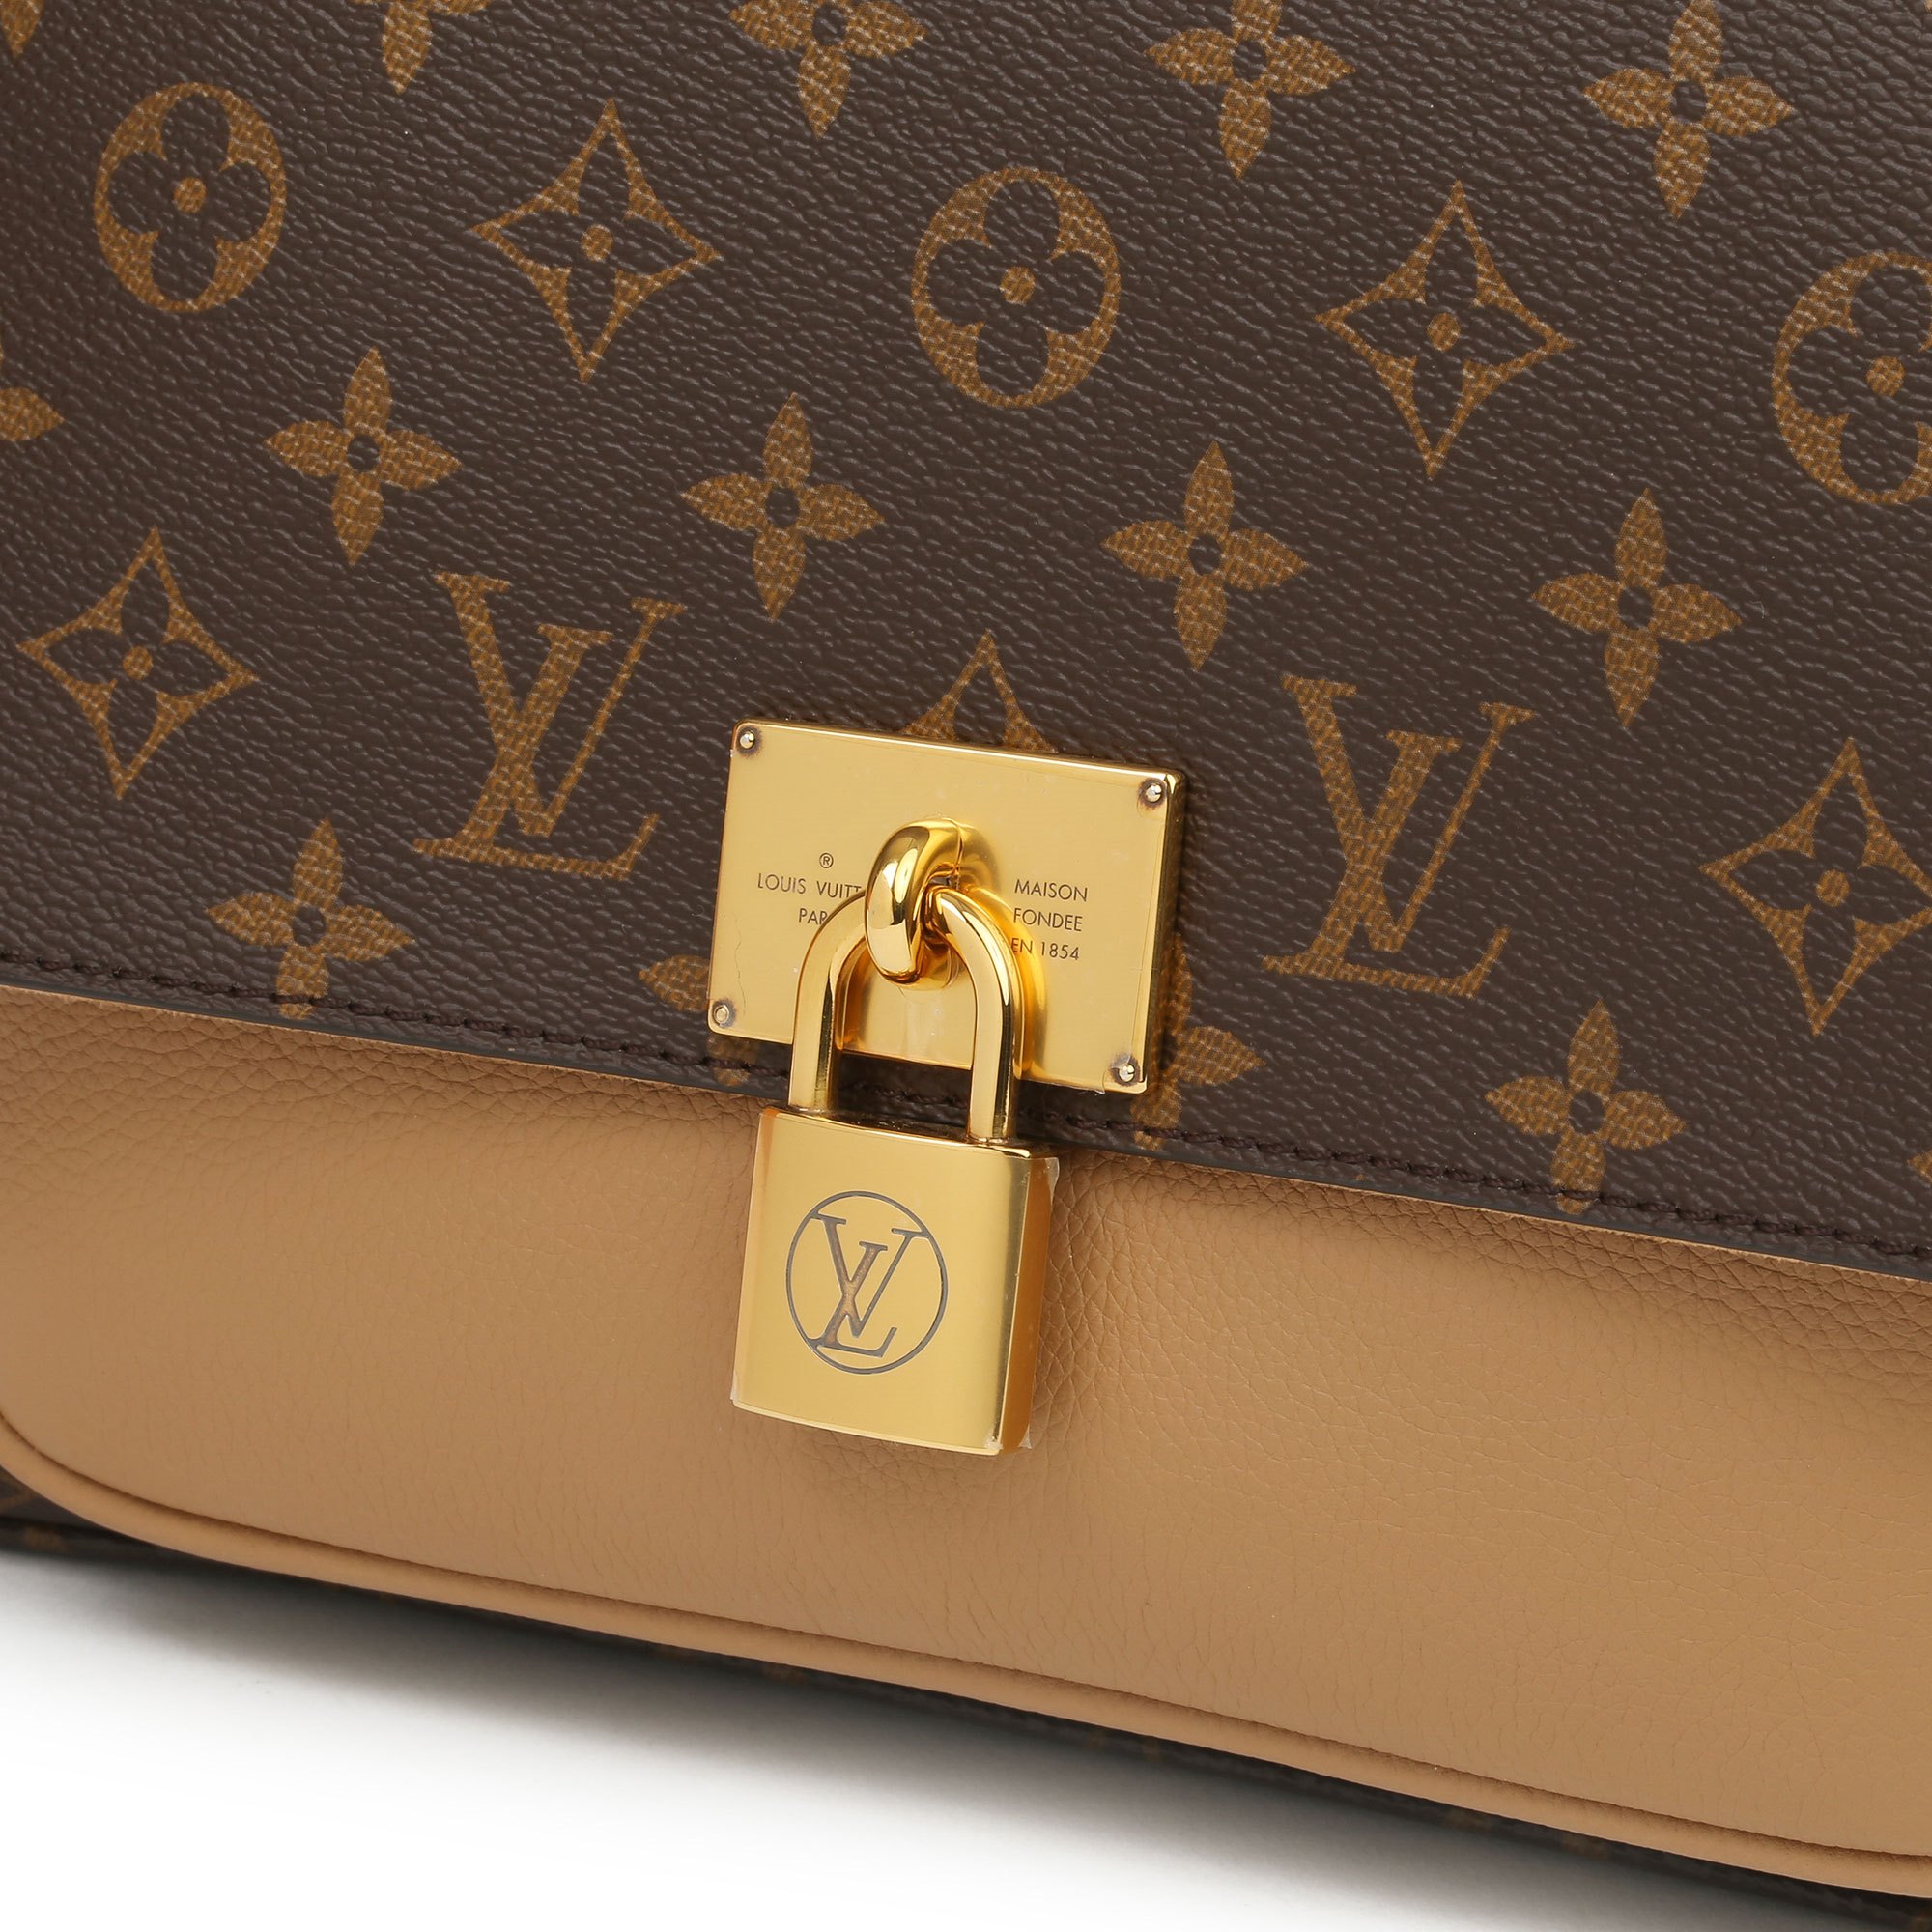 Louis Vuitton Marignan Messenger Top Handle Bag Review, Unboxing, Try-On